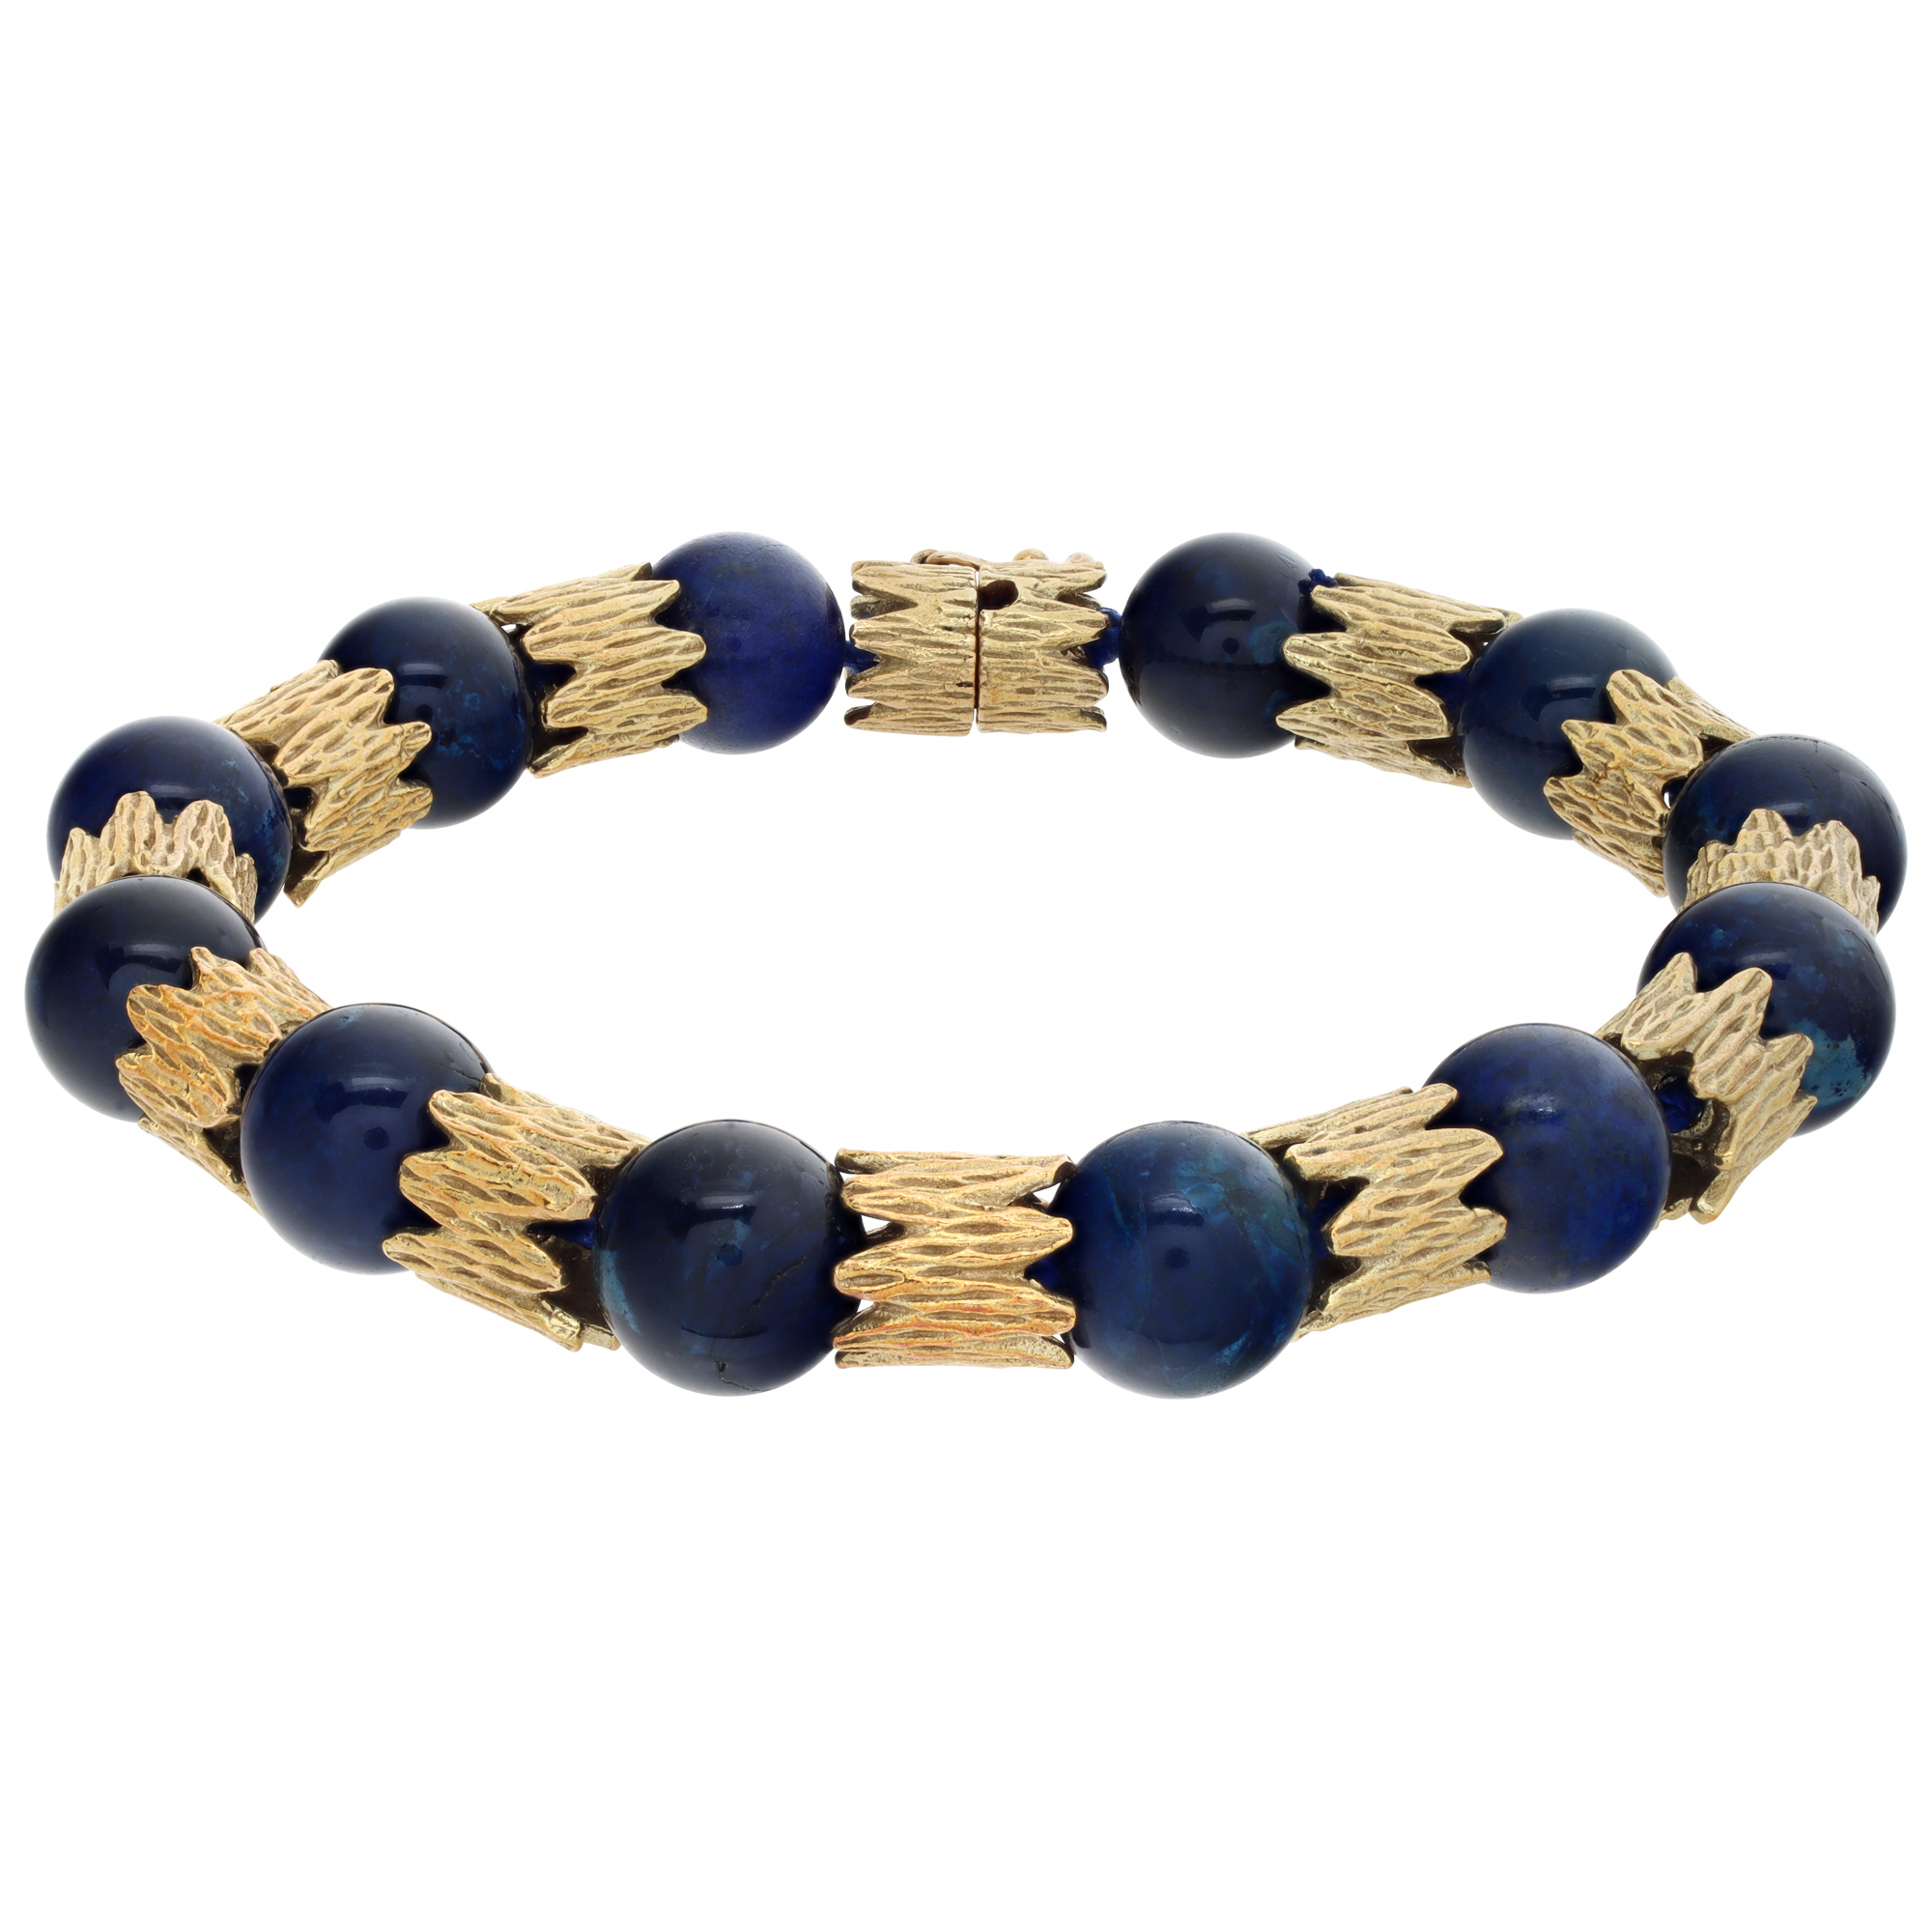 Round lapis lazuli beads (9.5 x 10mm) with 14K yellow gold stations bracelet. 8.00 inches long.